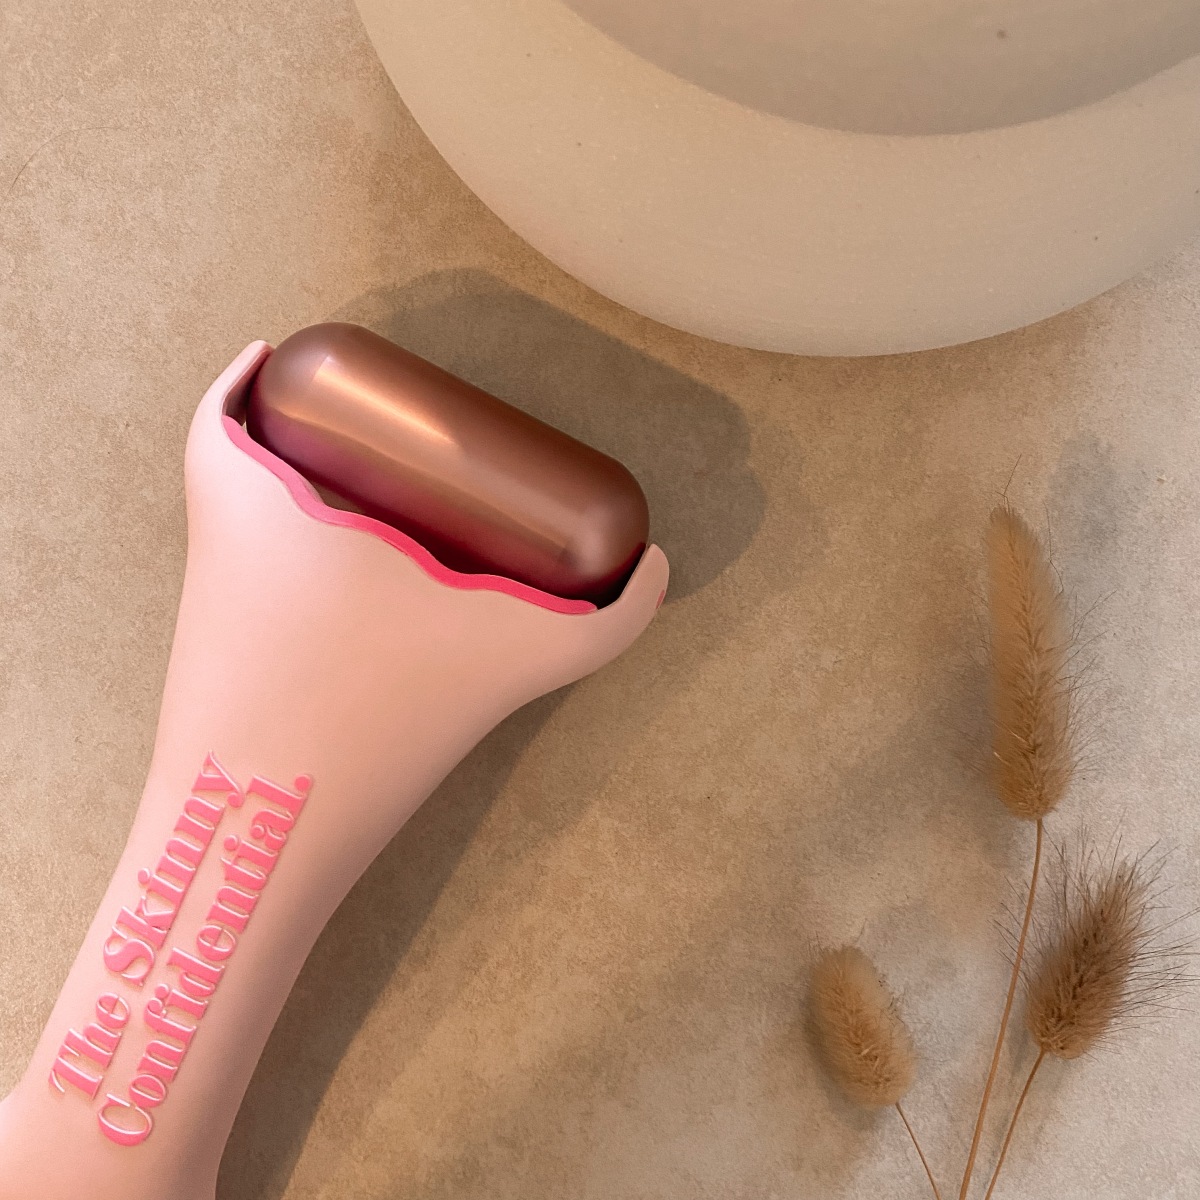 The Prettiest — and Best — Ice Roller from The Skinny Confidential